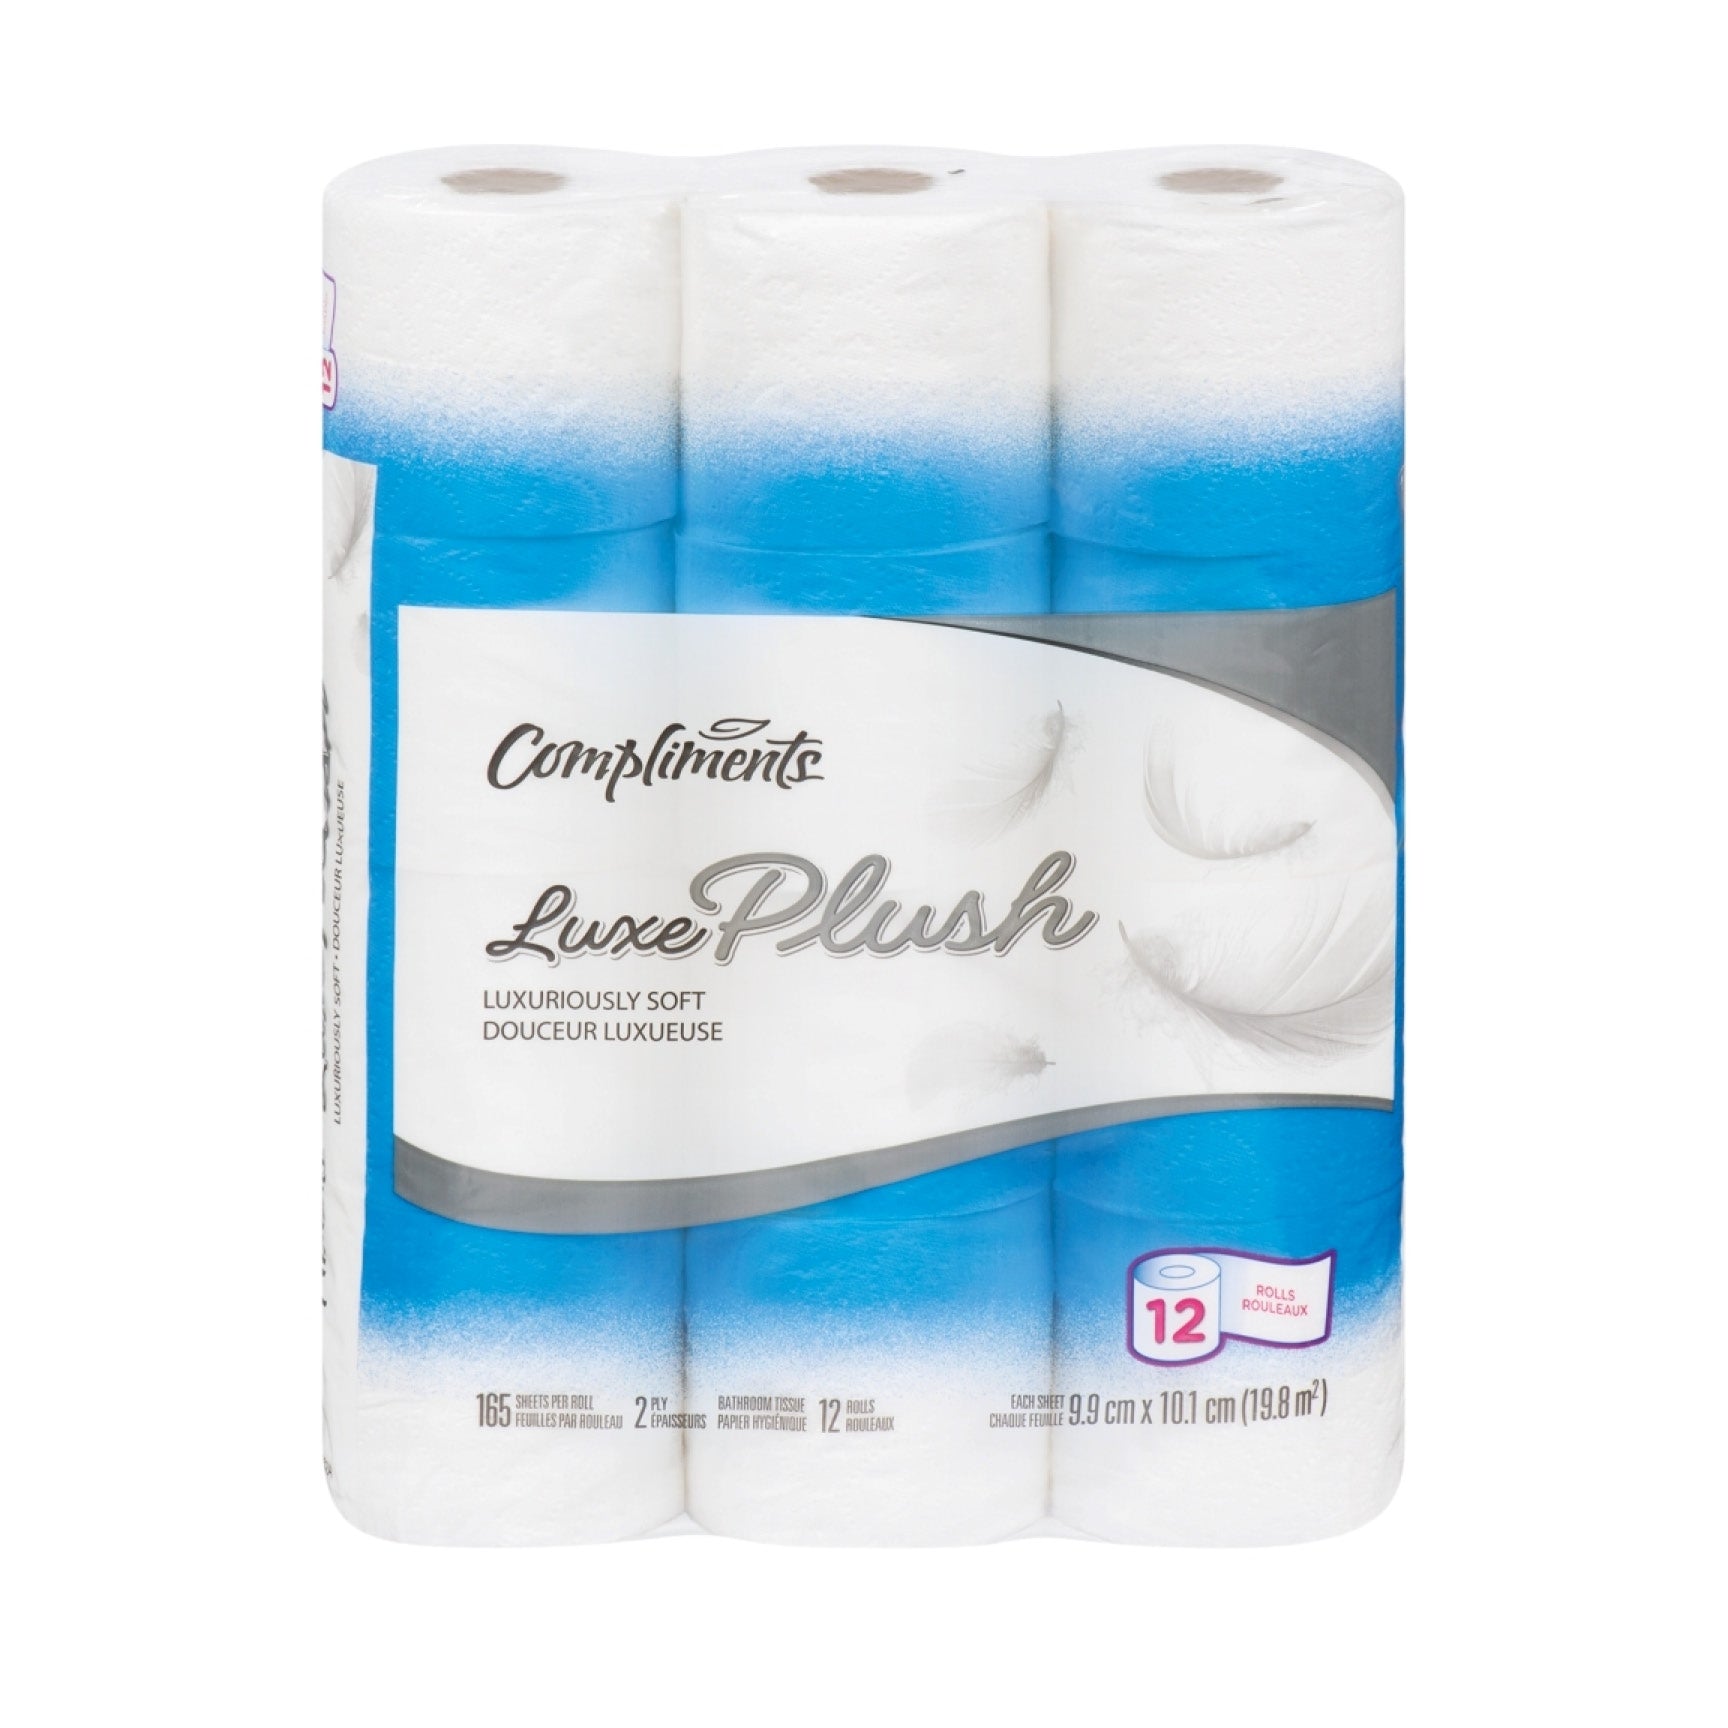 Compliments Bathroom Tissue (Toilet Paper), Plush Ultra 165 Sheets, 3ply, 12pk